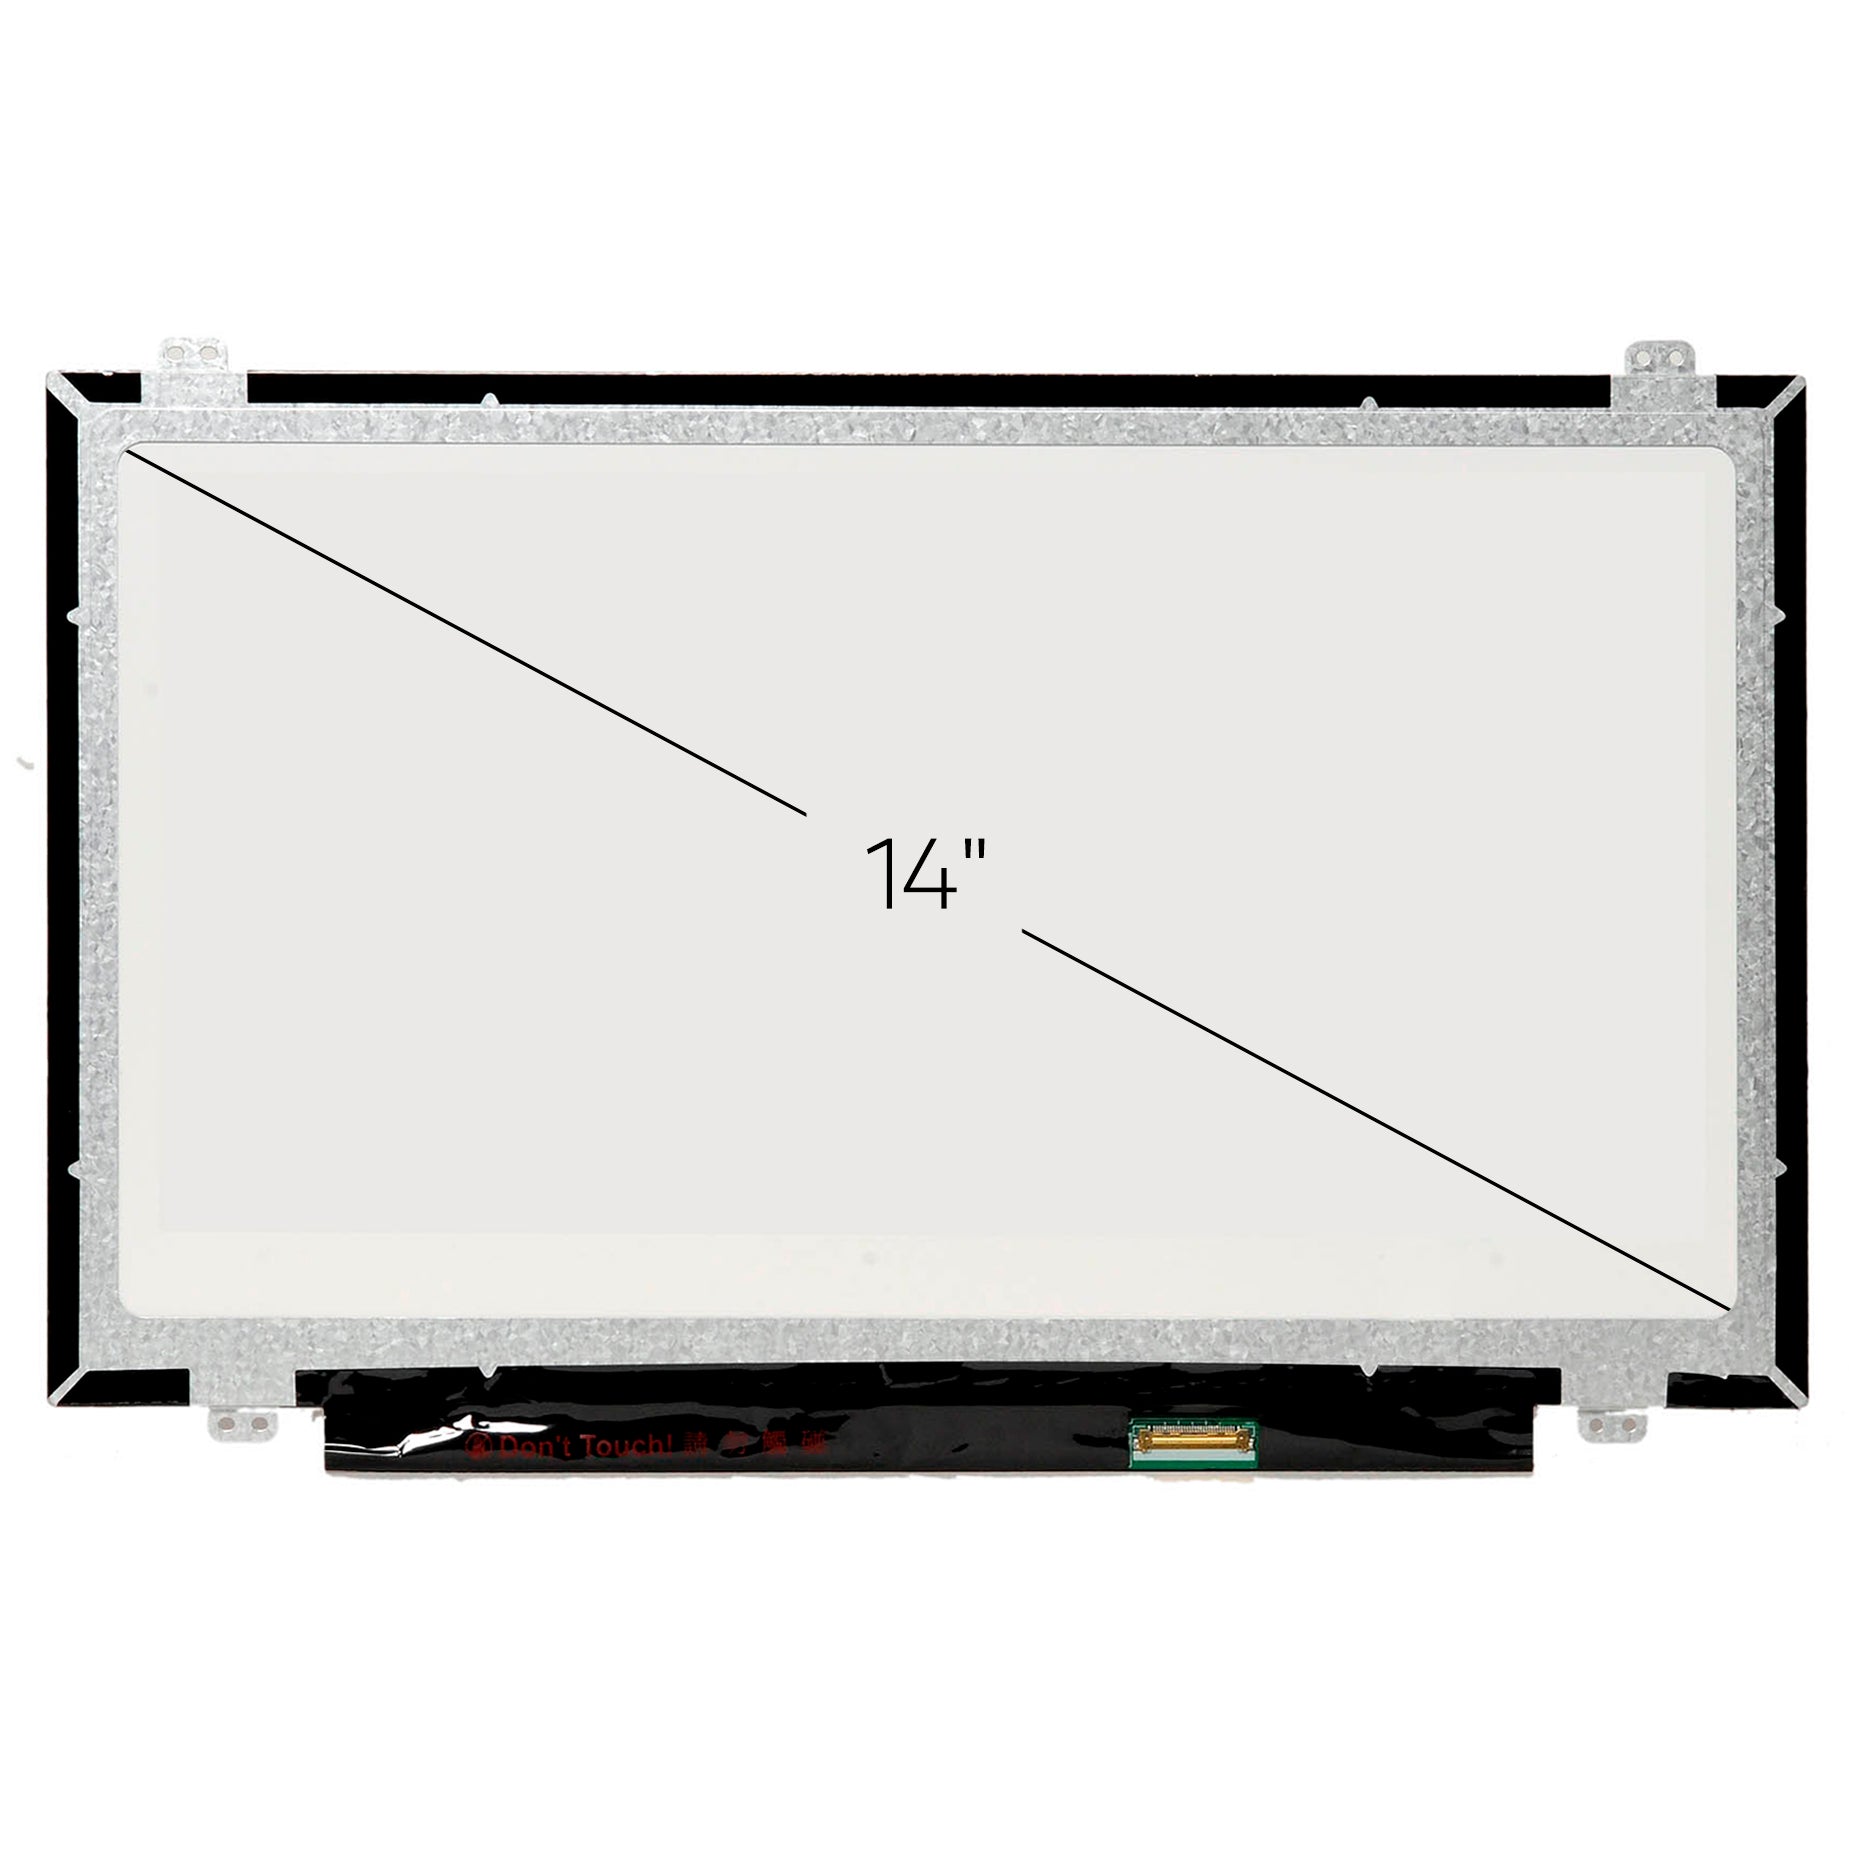 Screen Replacement for Lenovo B40-30 HD 1366x768 Glossy LCD LED Display